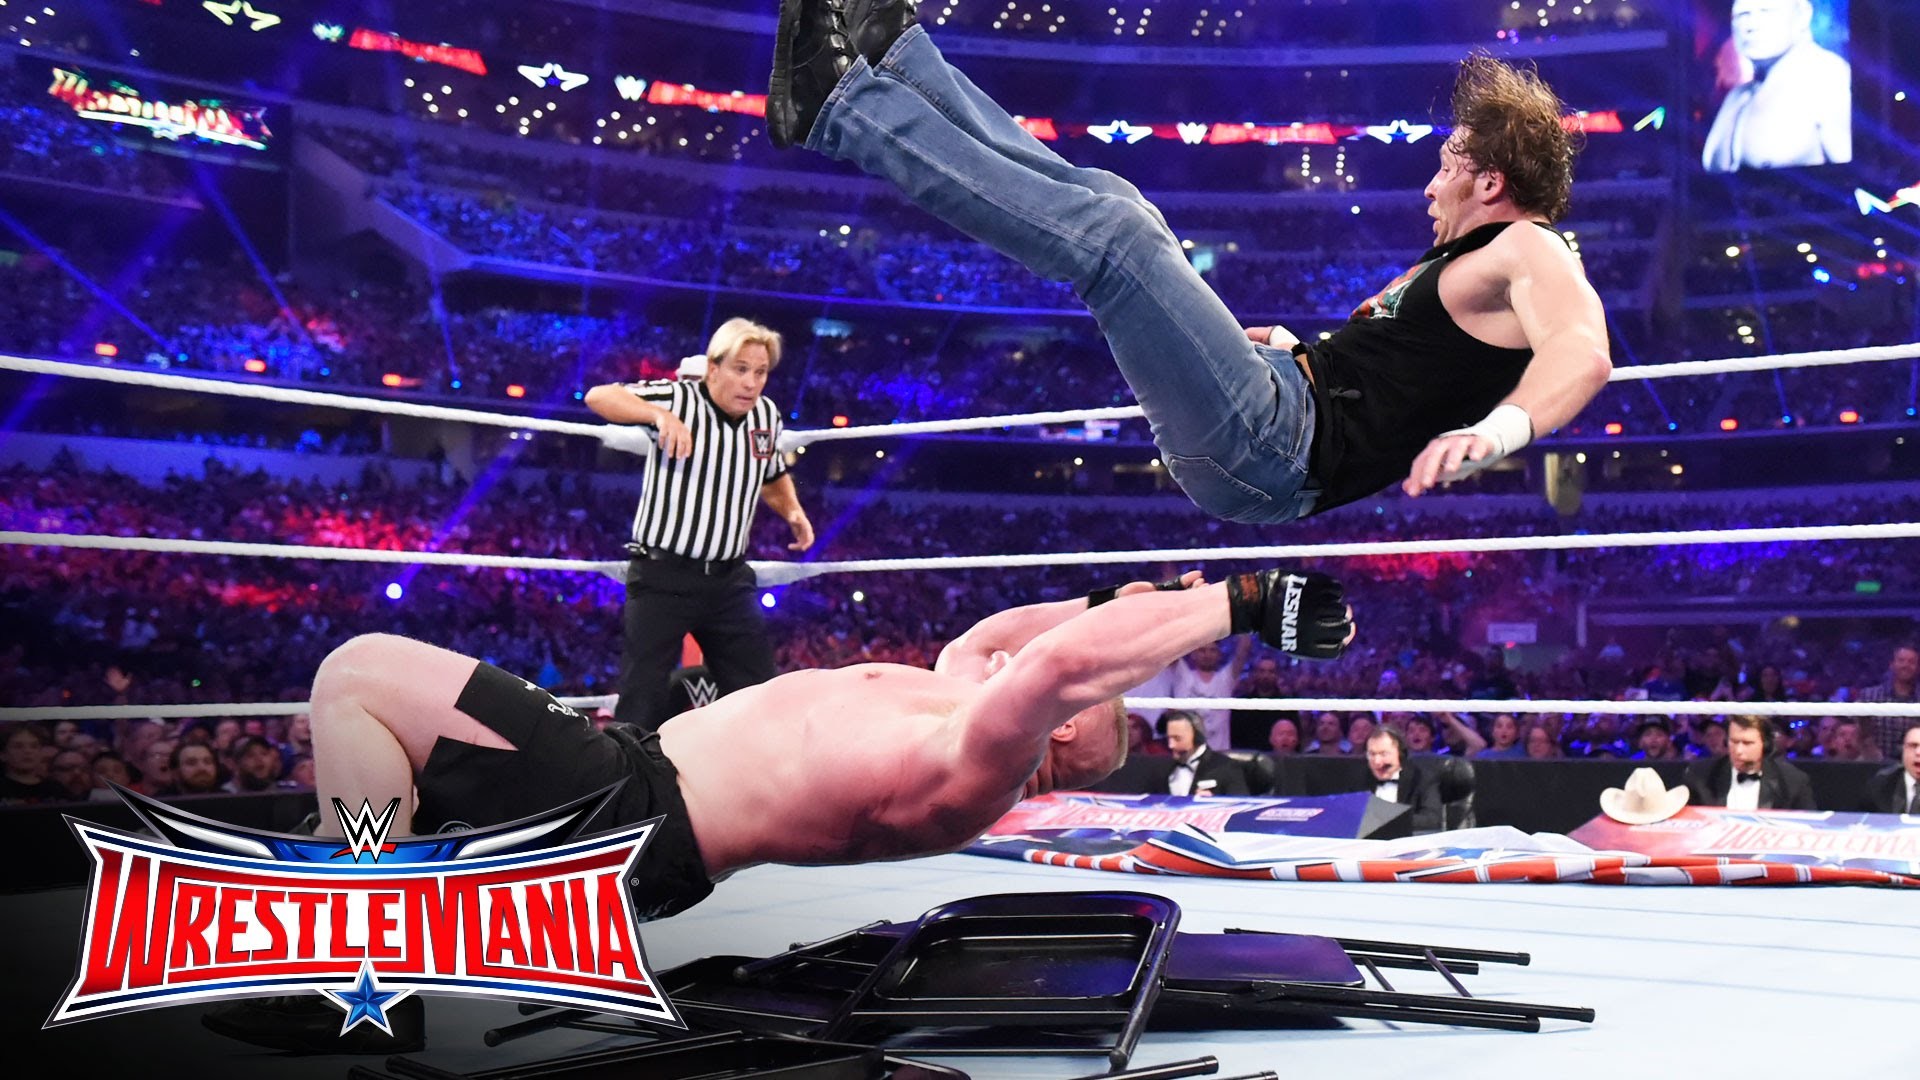 1920x1080 Dean Ambrose vs. Brock Lesnar - No Holds Barred Street Fight: WrestleMania  32 on WWE Network - YouTube